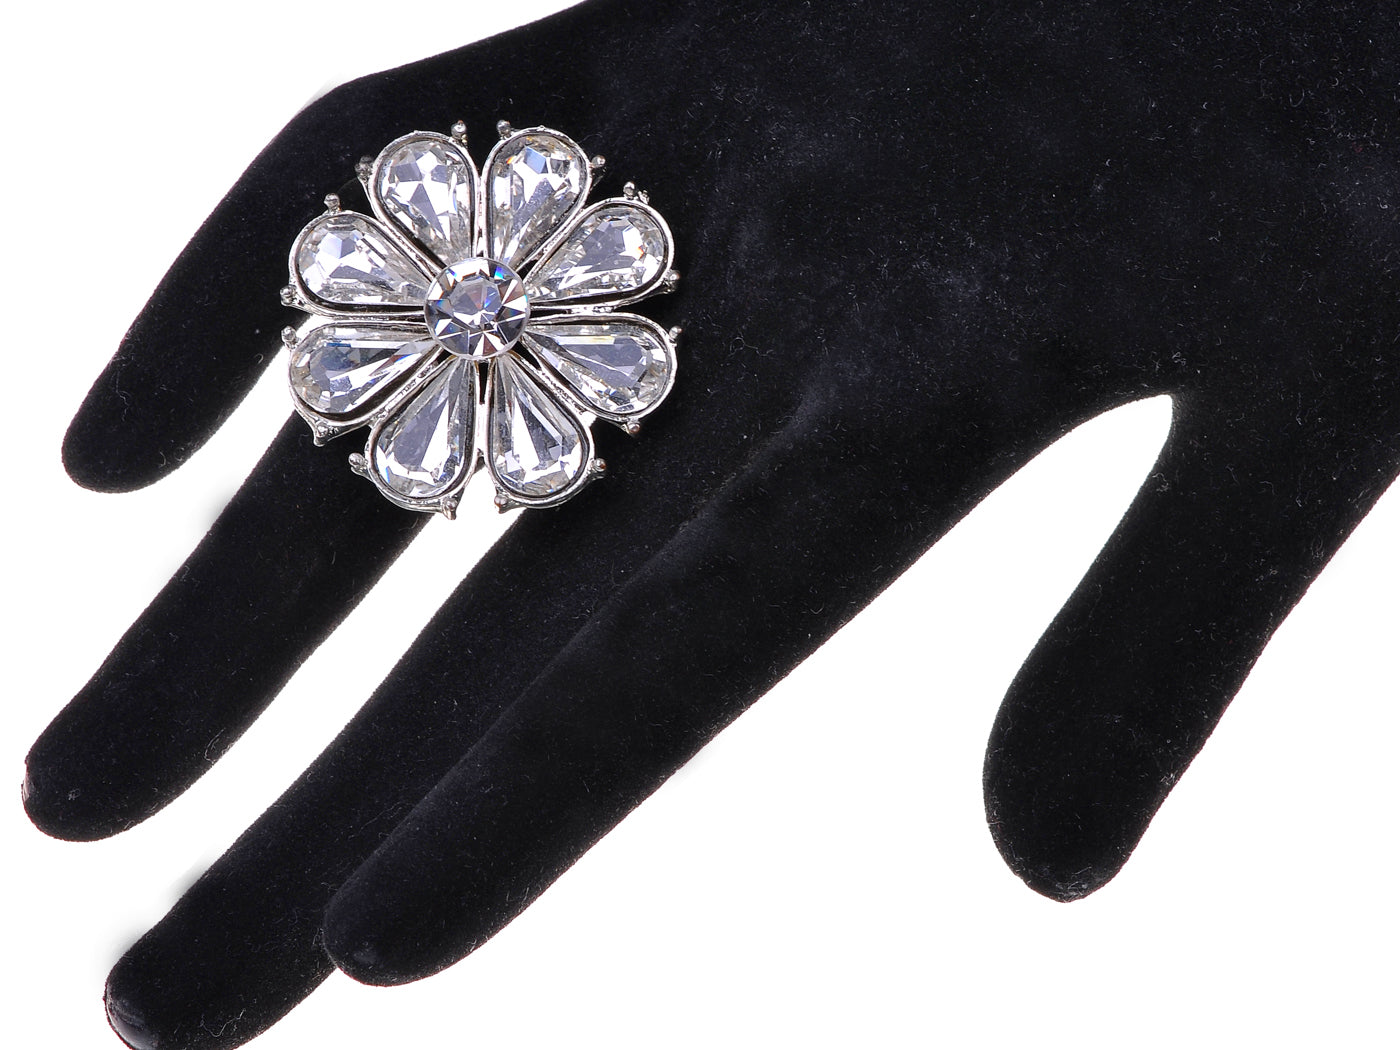 Floral Petals Silver Daisy Flower Ring